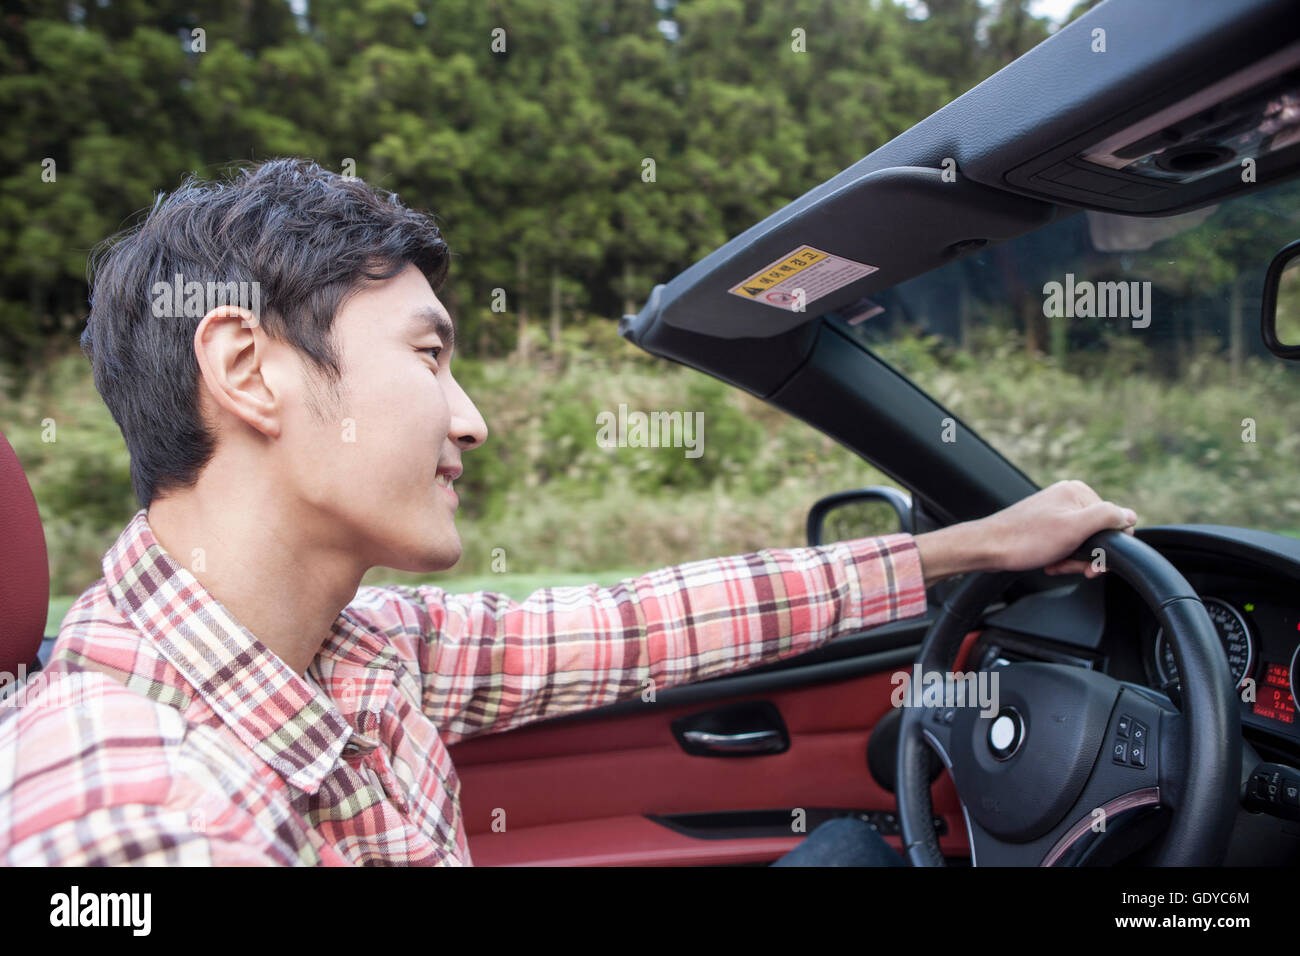 Side view portrait of young man driving a car Stock Photo